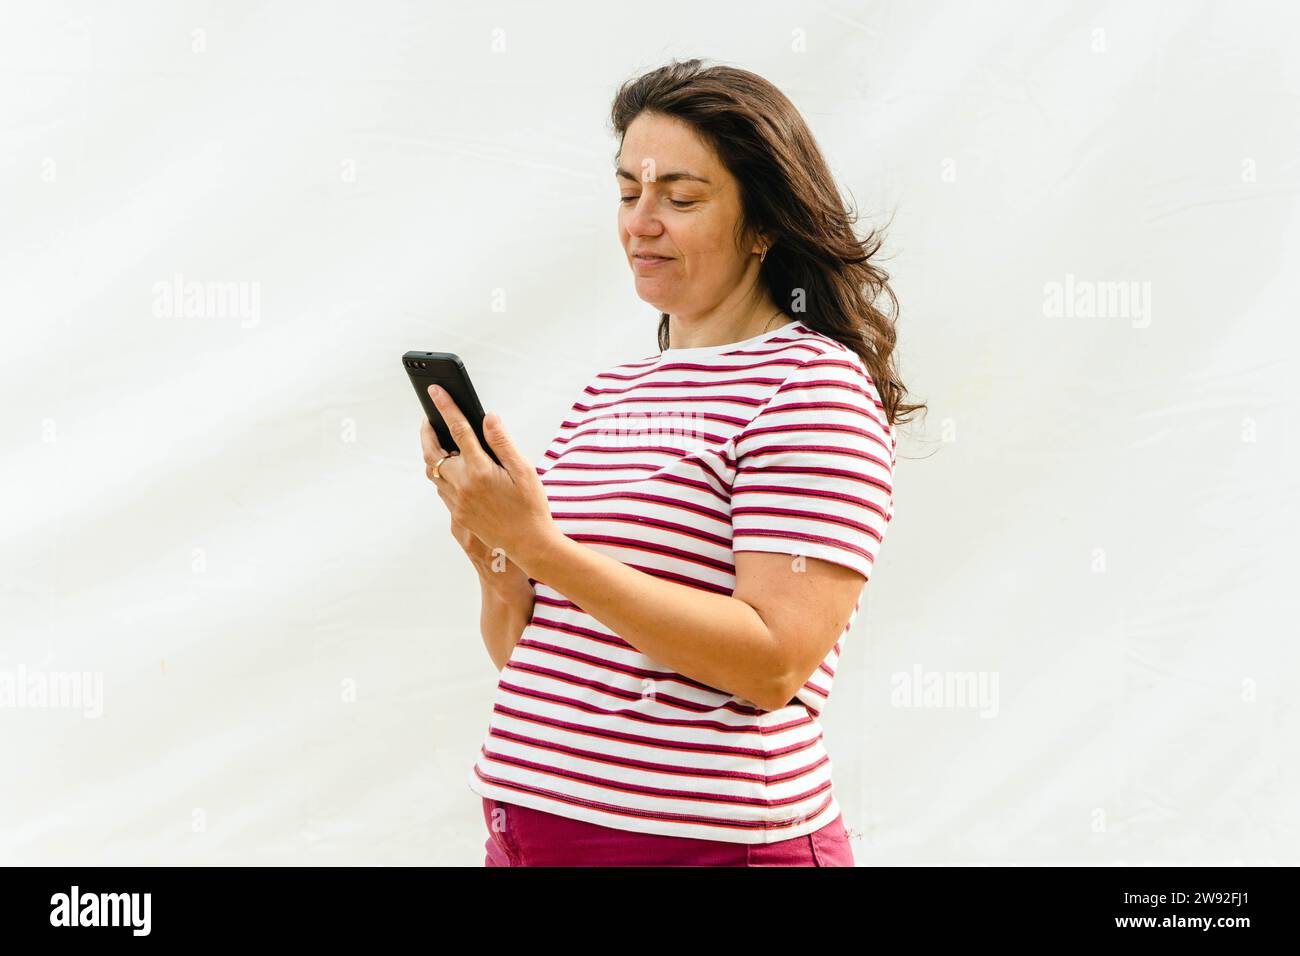 long-haired middle-aged lady in a striped top, engrossed in using her smartphone, exuding a modern and tech-savvy vibe. Stock Photo